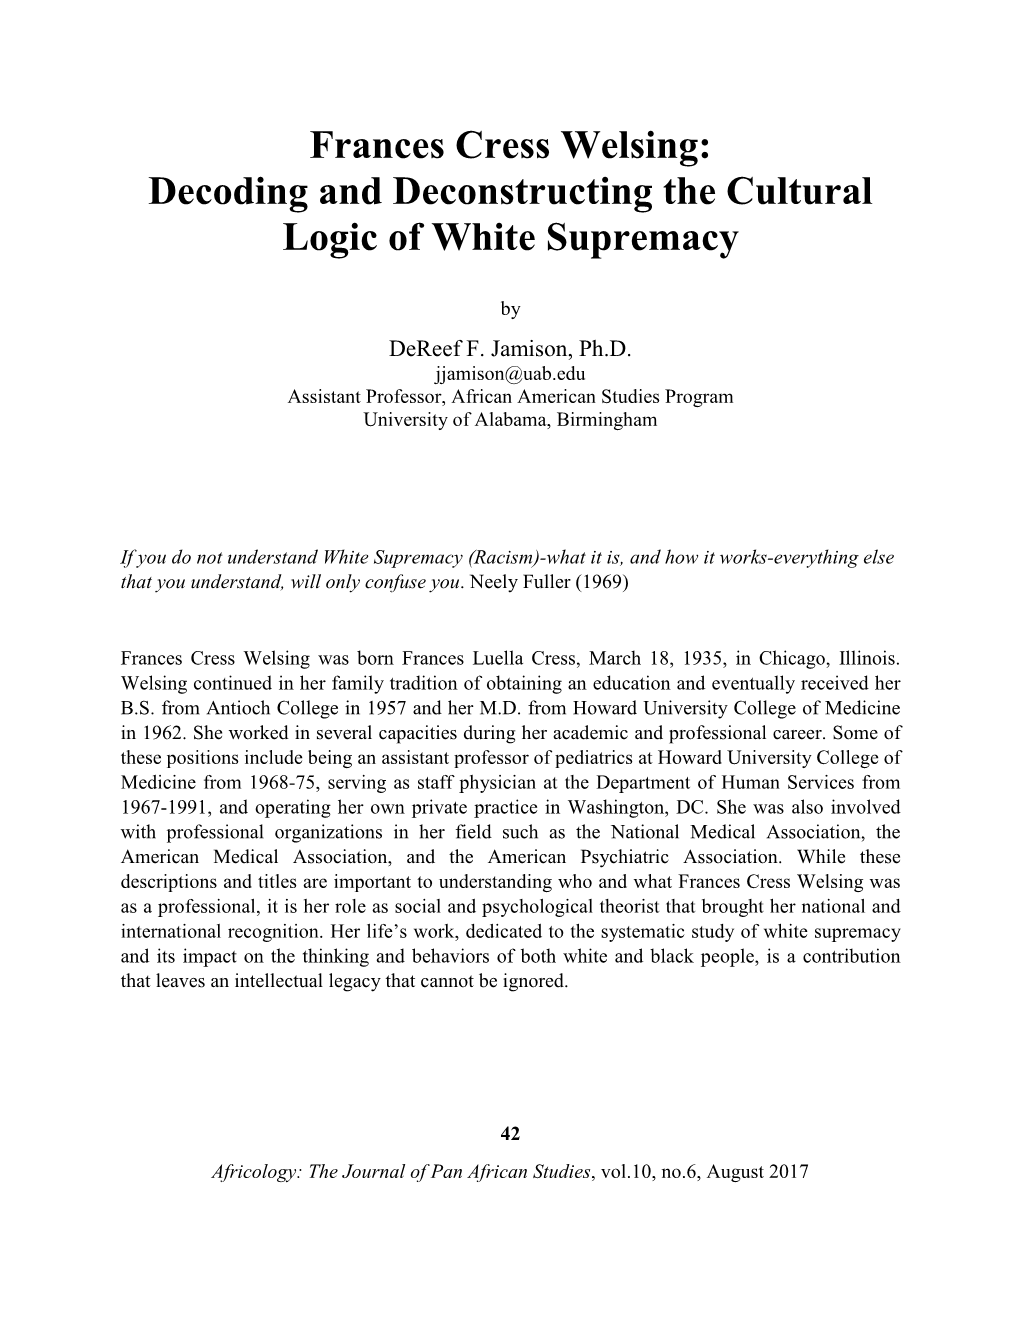 Frances Cress Welsing: Decoding and Deconstructing the Cultural Logic of White Supremacy